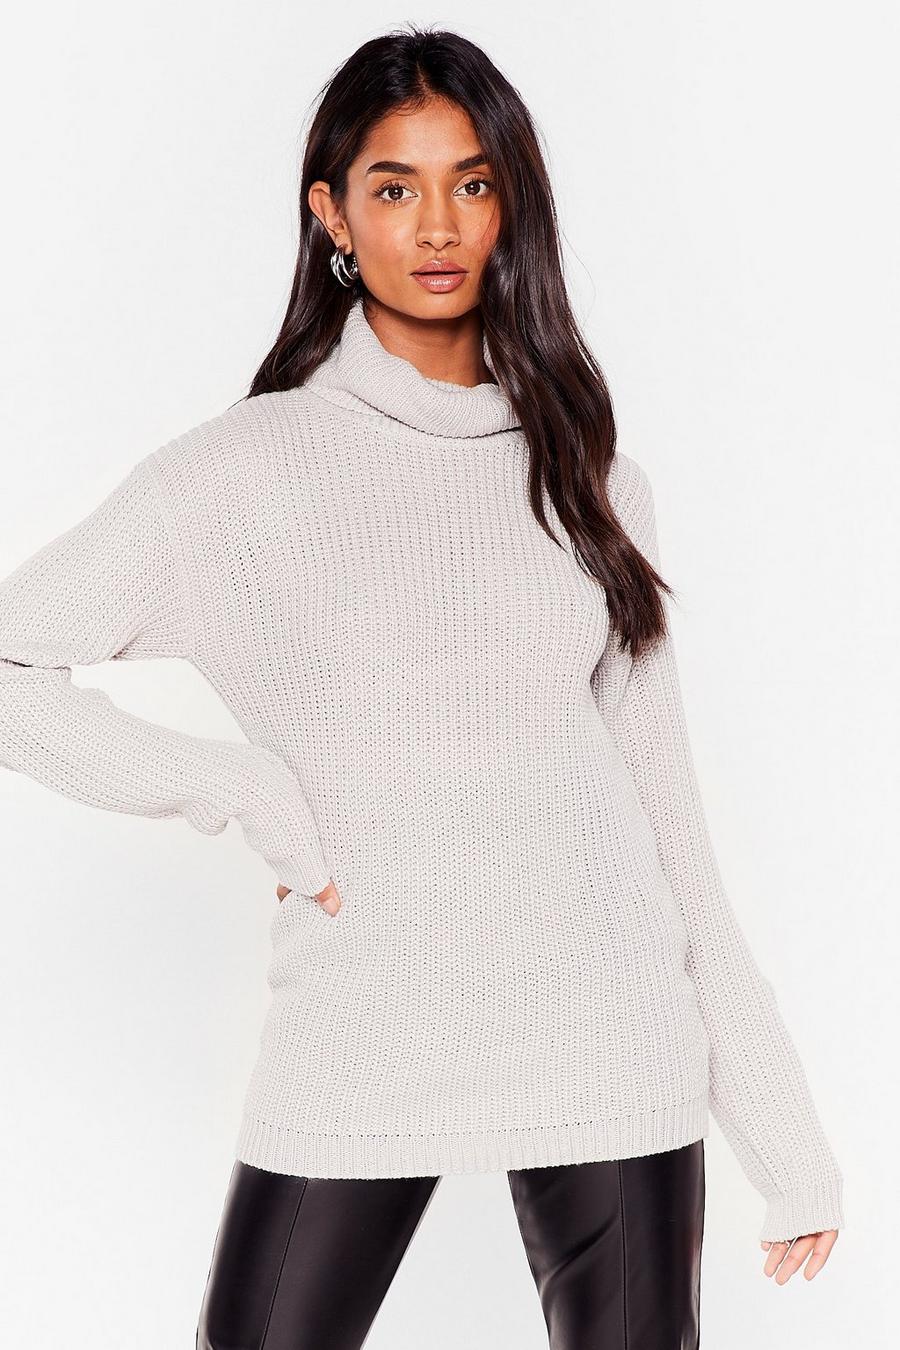 Let the Goodtimes Roll Longline Sweater